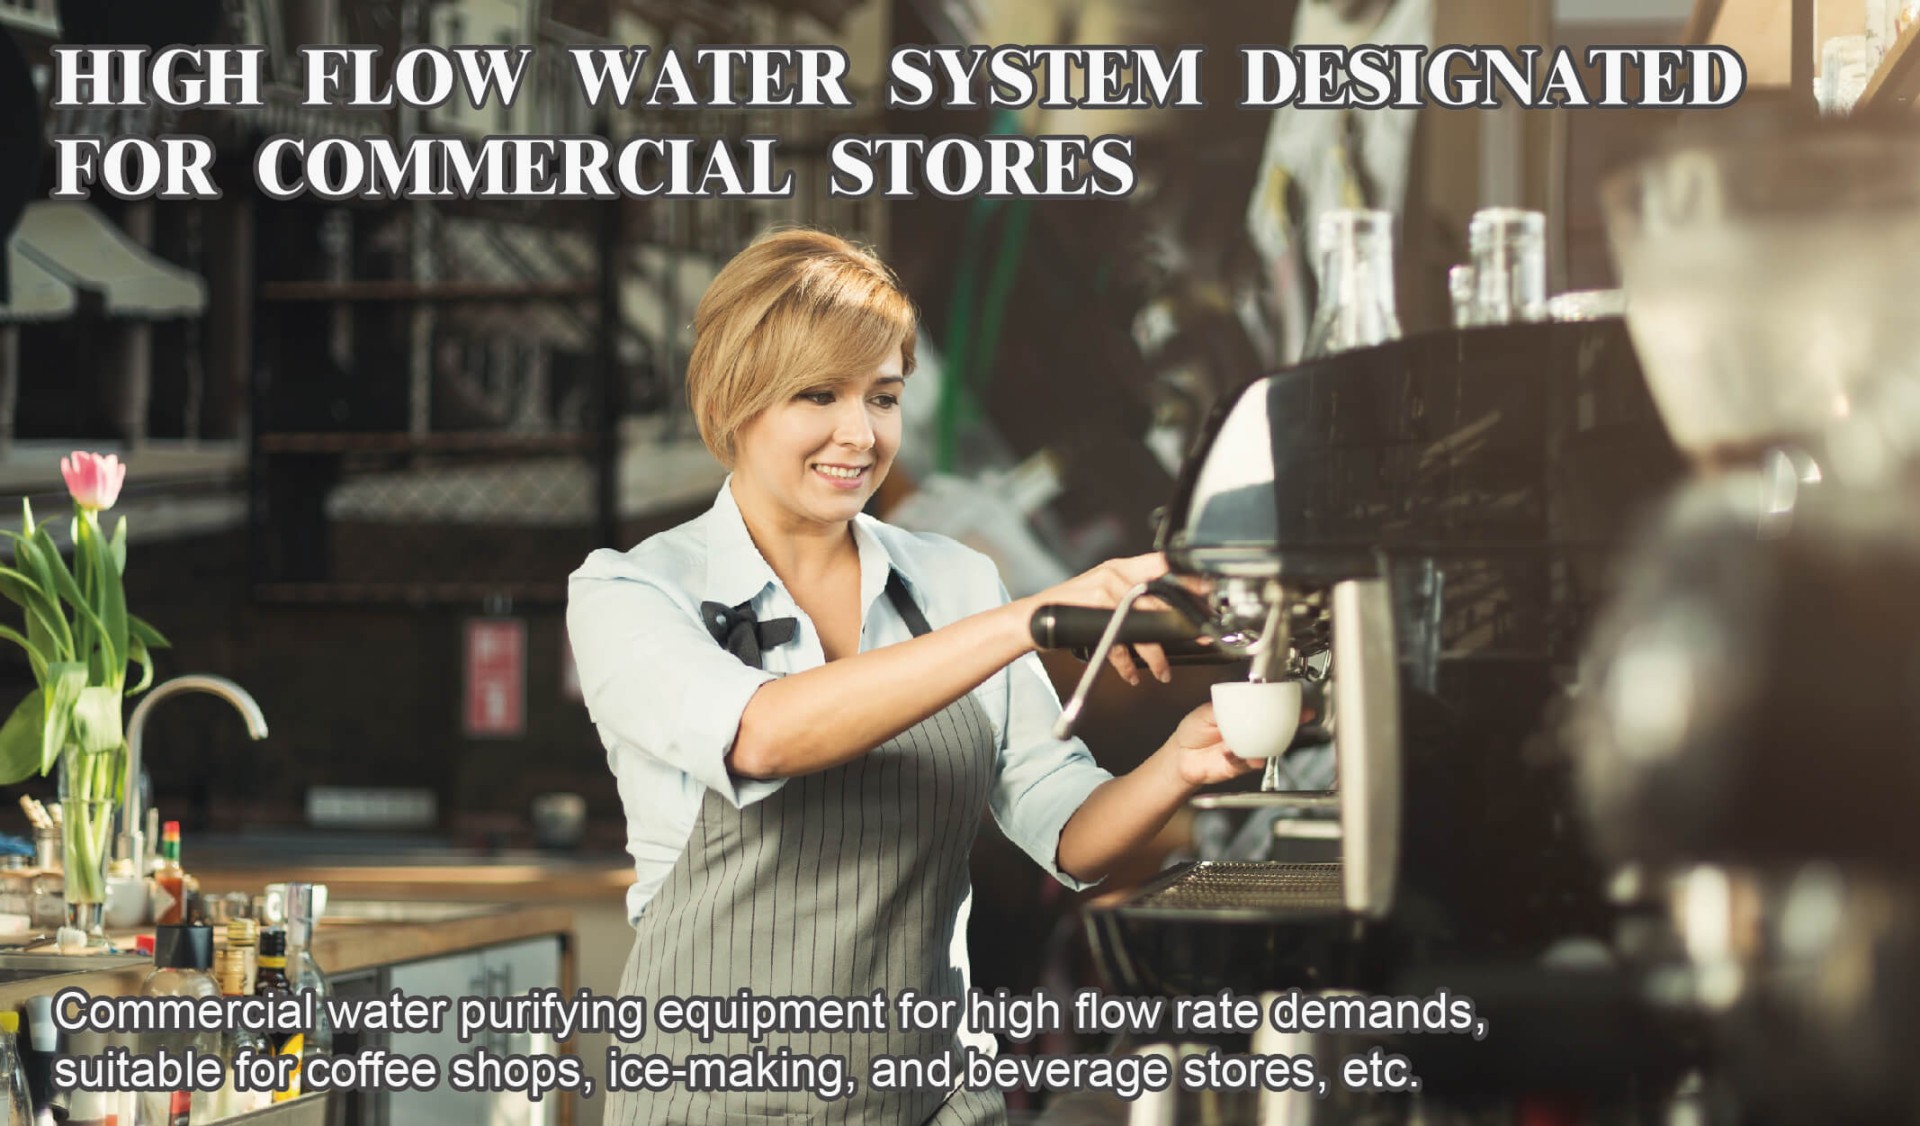 HIGH FLOW WATER SYSTEM DESIGNATED FOR COMMERCIAL STORES